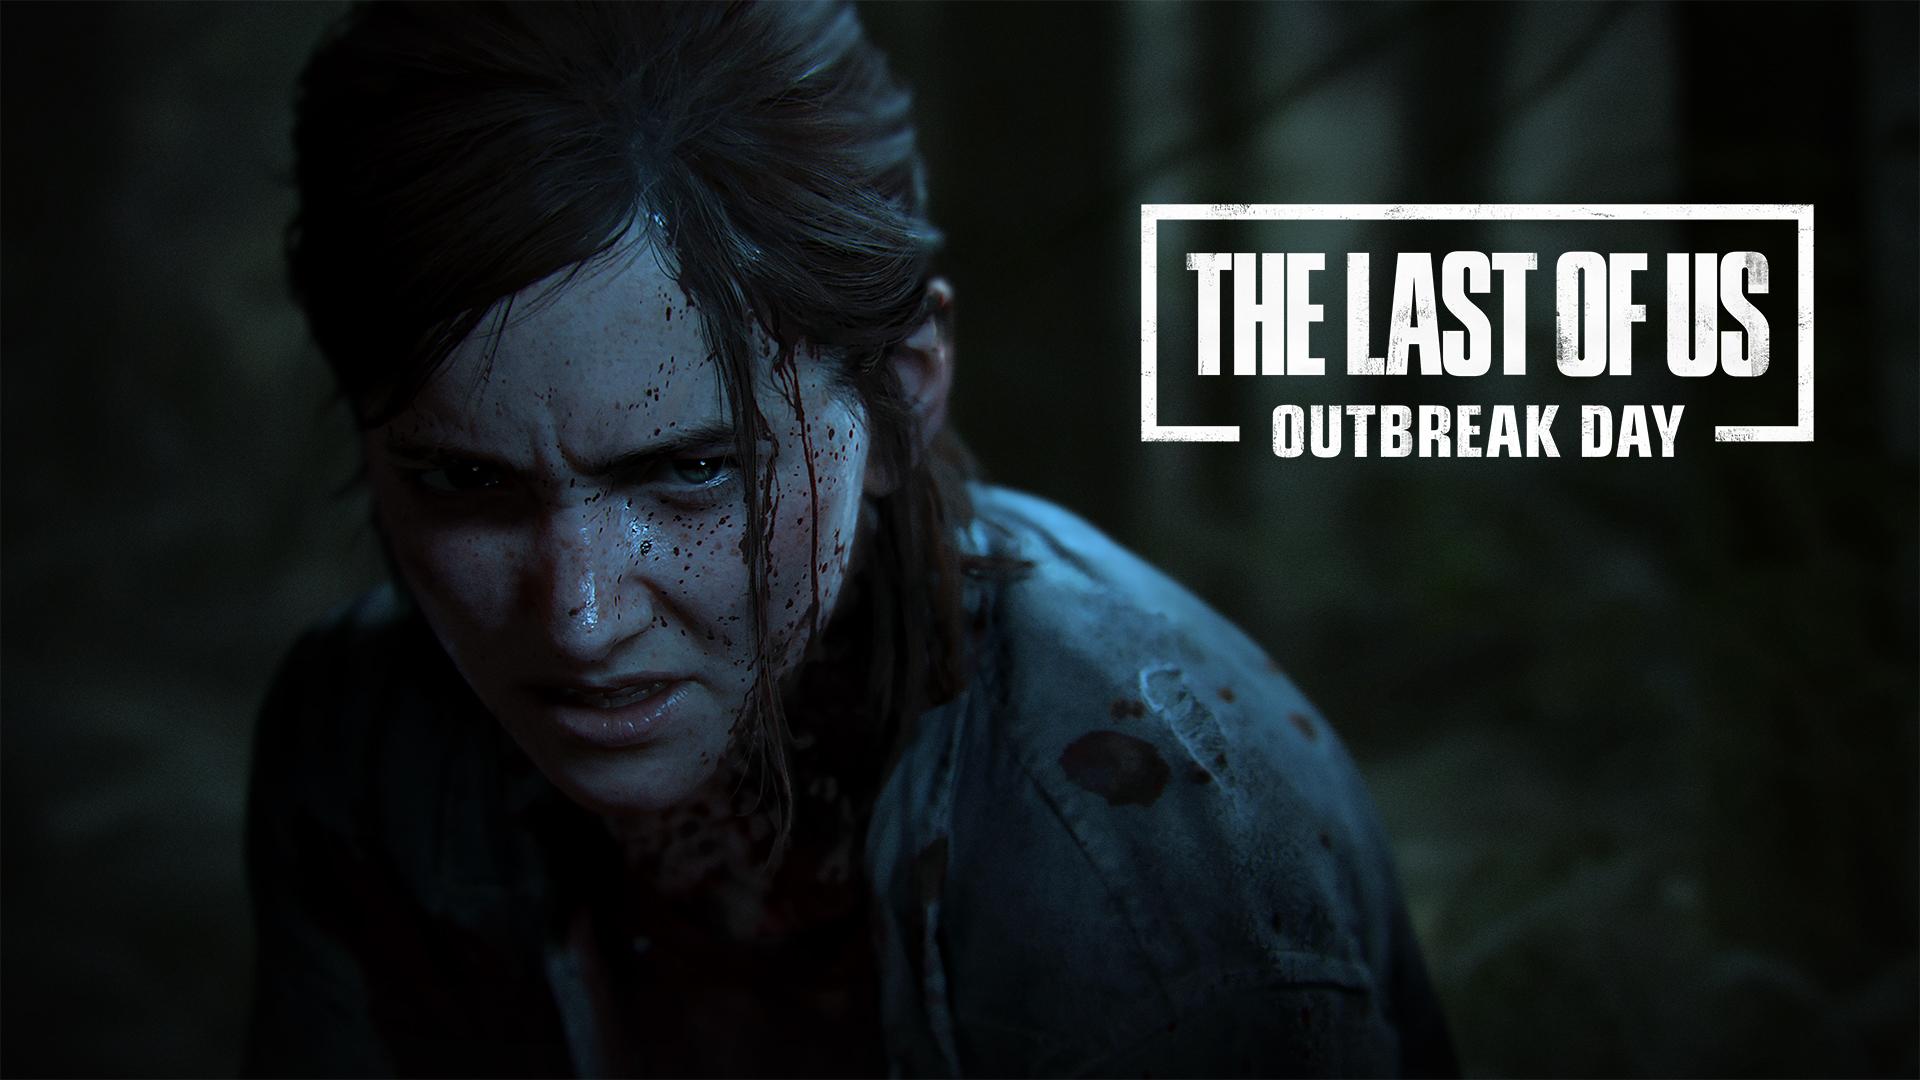 The last of us pc download key